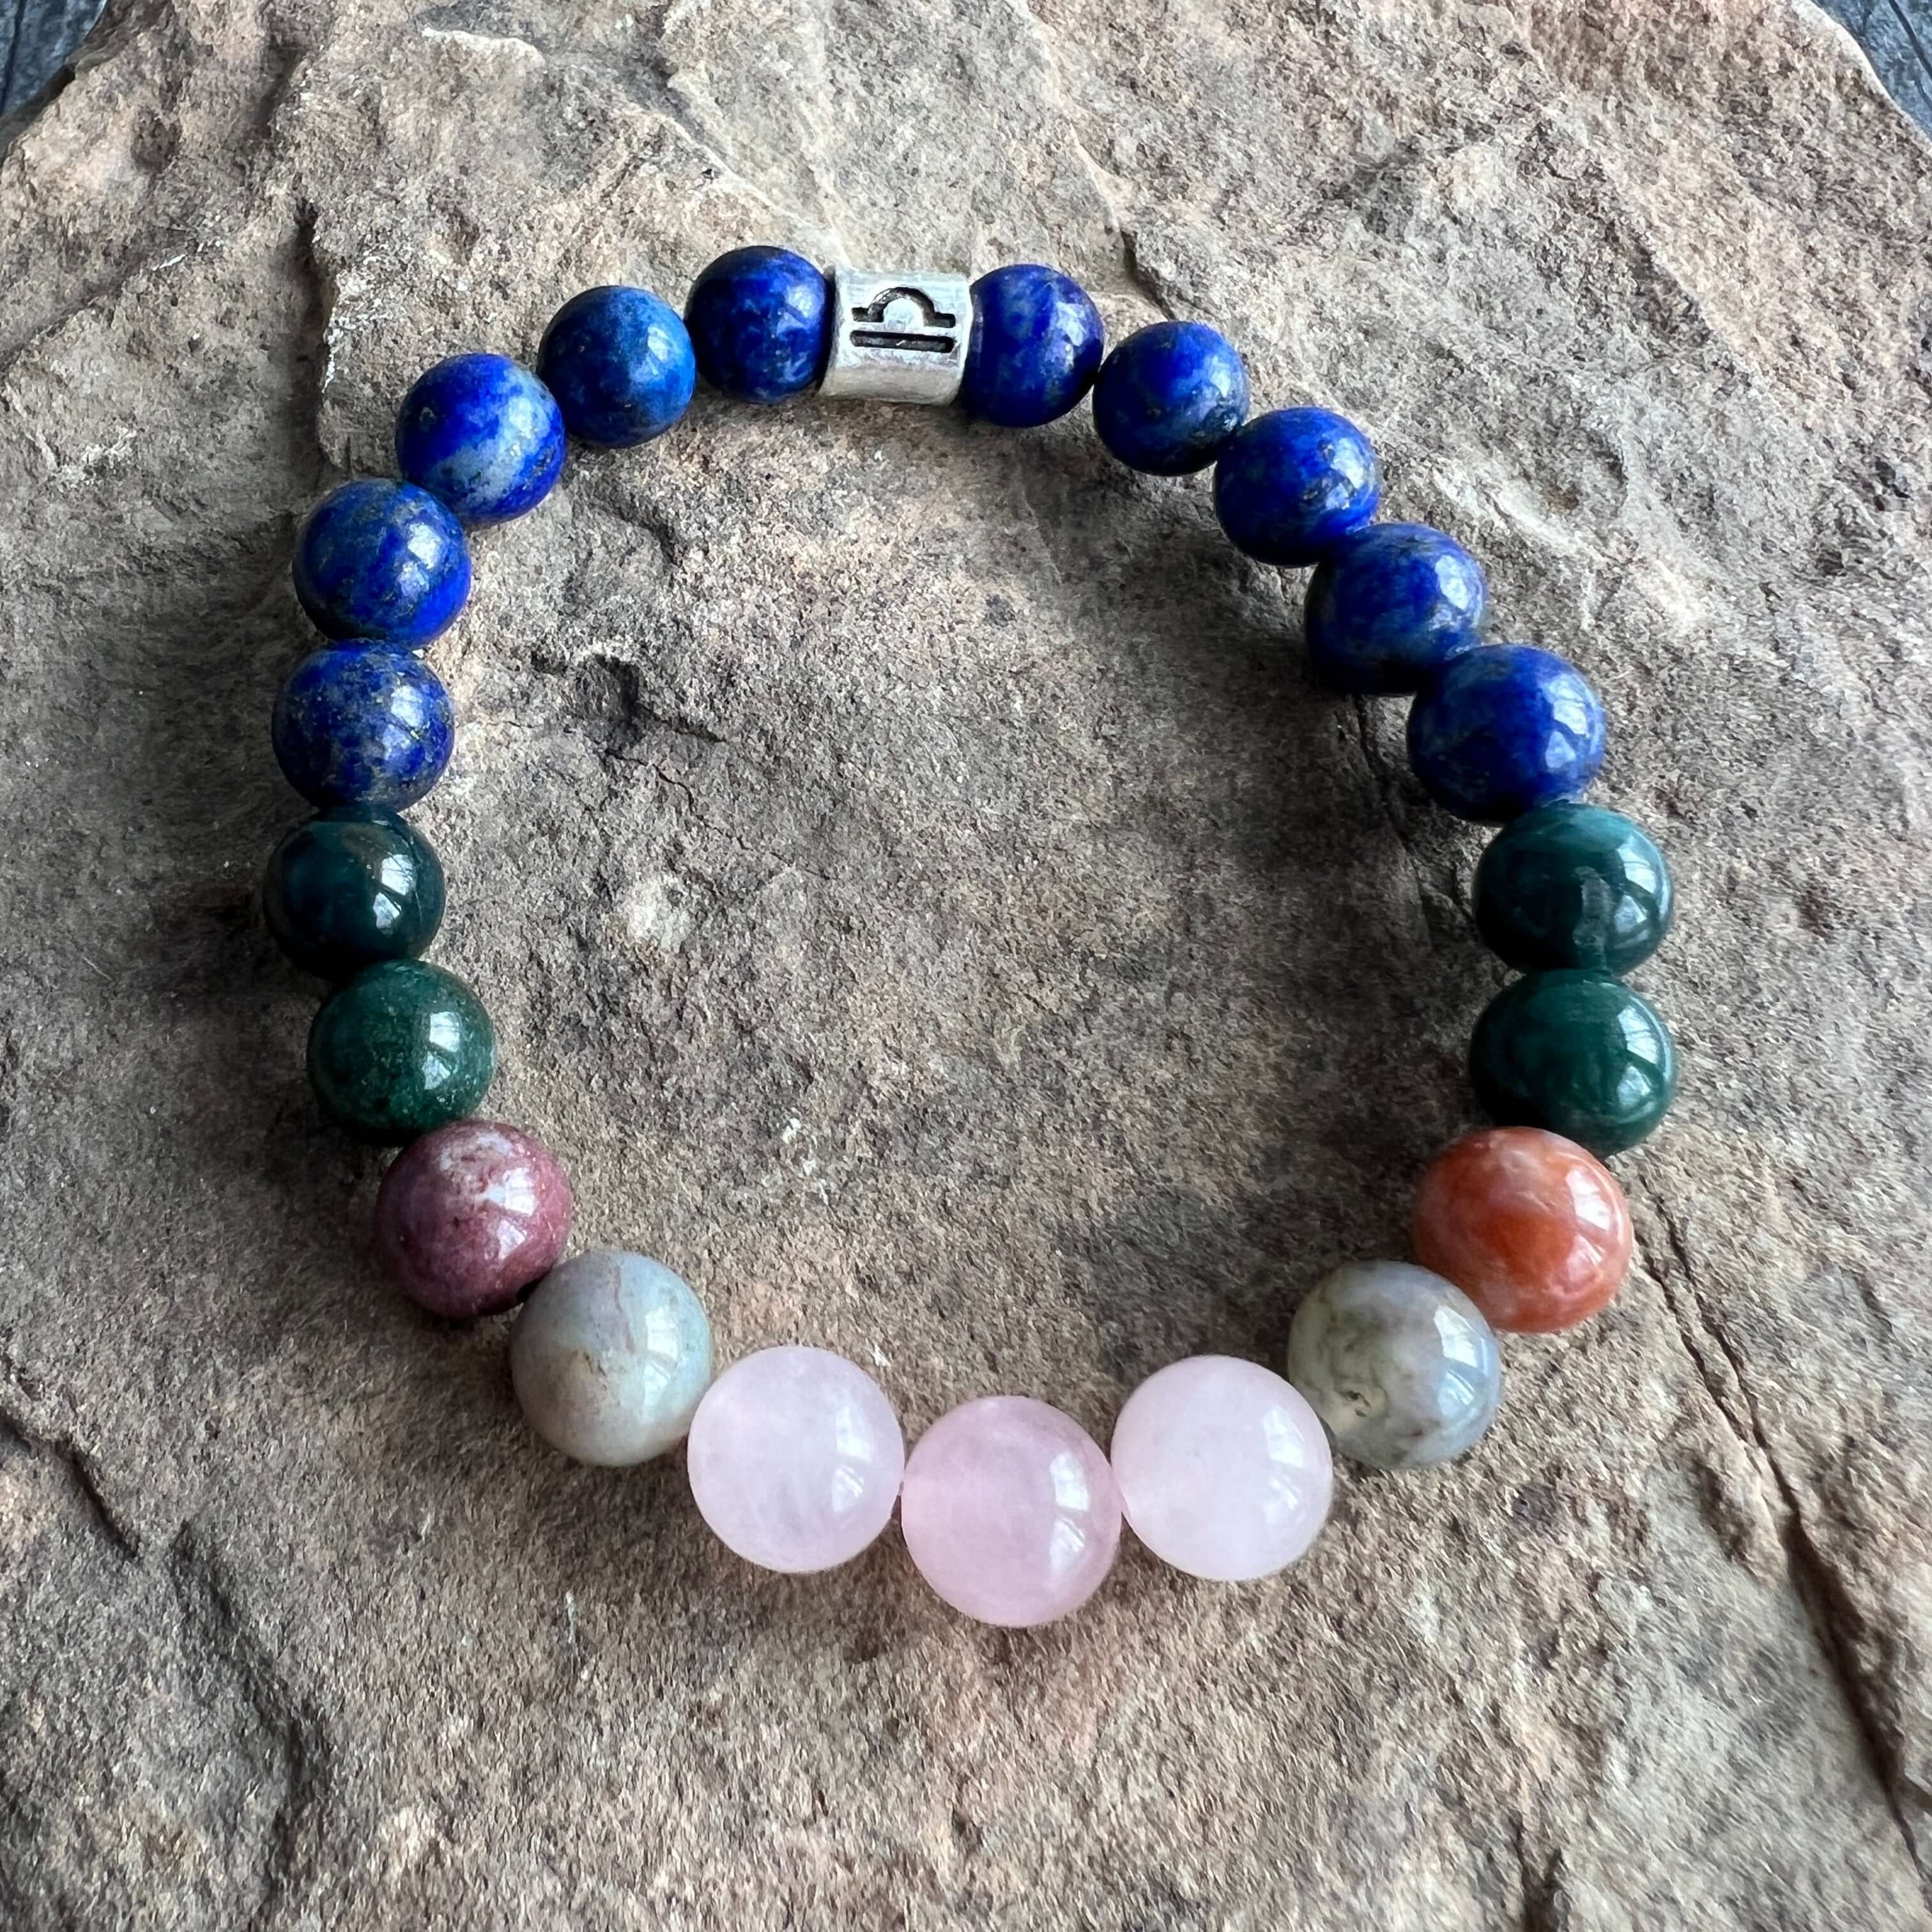 Libra Zodiac Bracelet The Libra Zodiac Bracelet is created with a combination of Rose Quartz, Agate and Lapis beads, which resonate with the graceful and harmonious qualities associated with this zodiac sign.